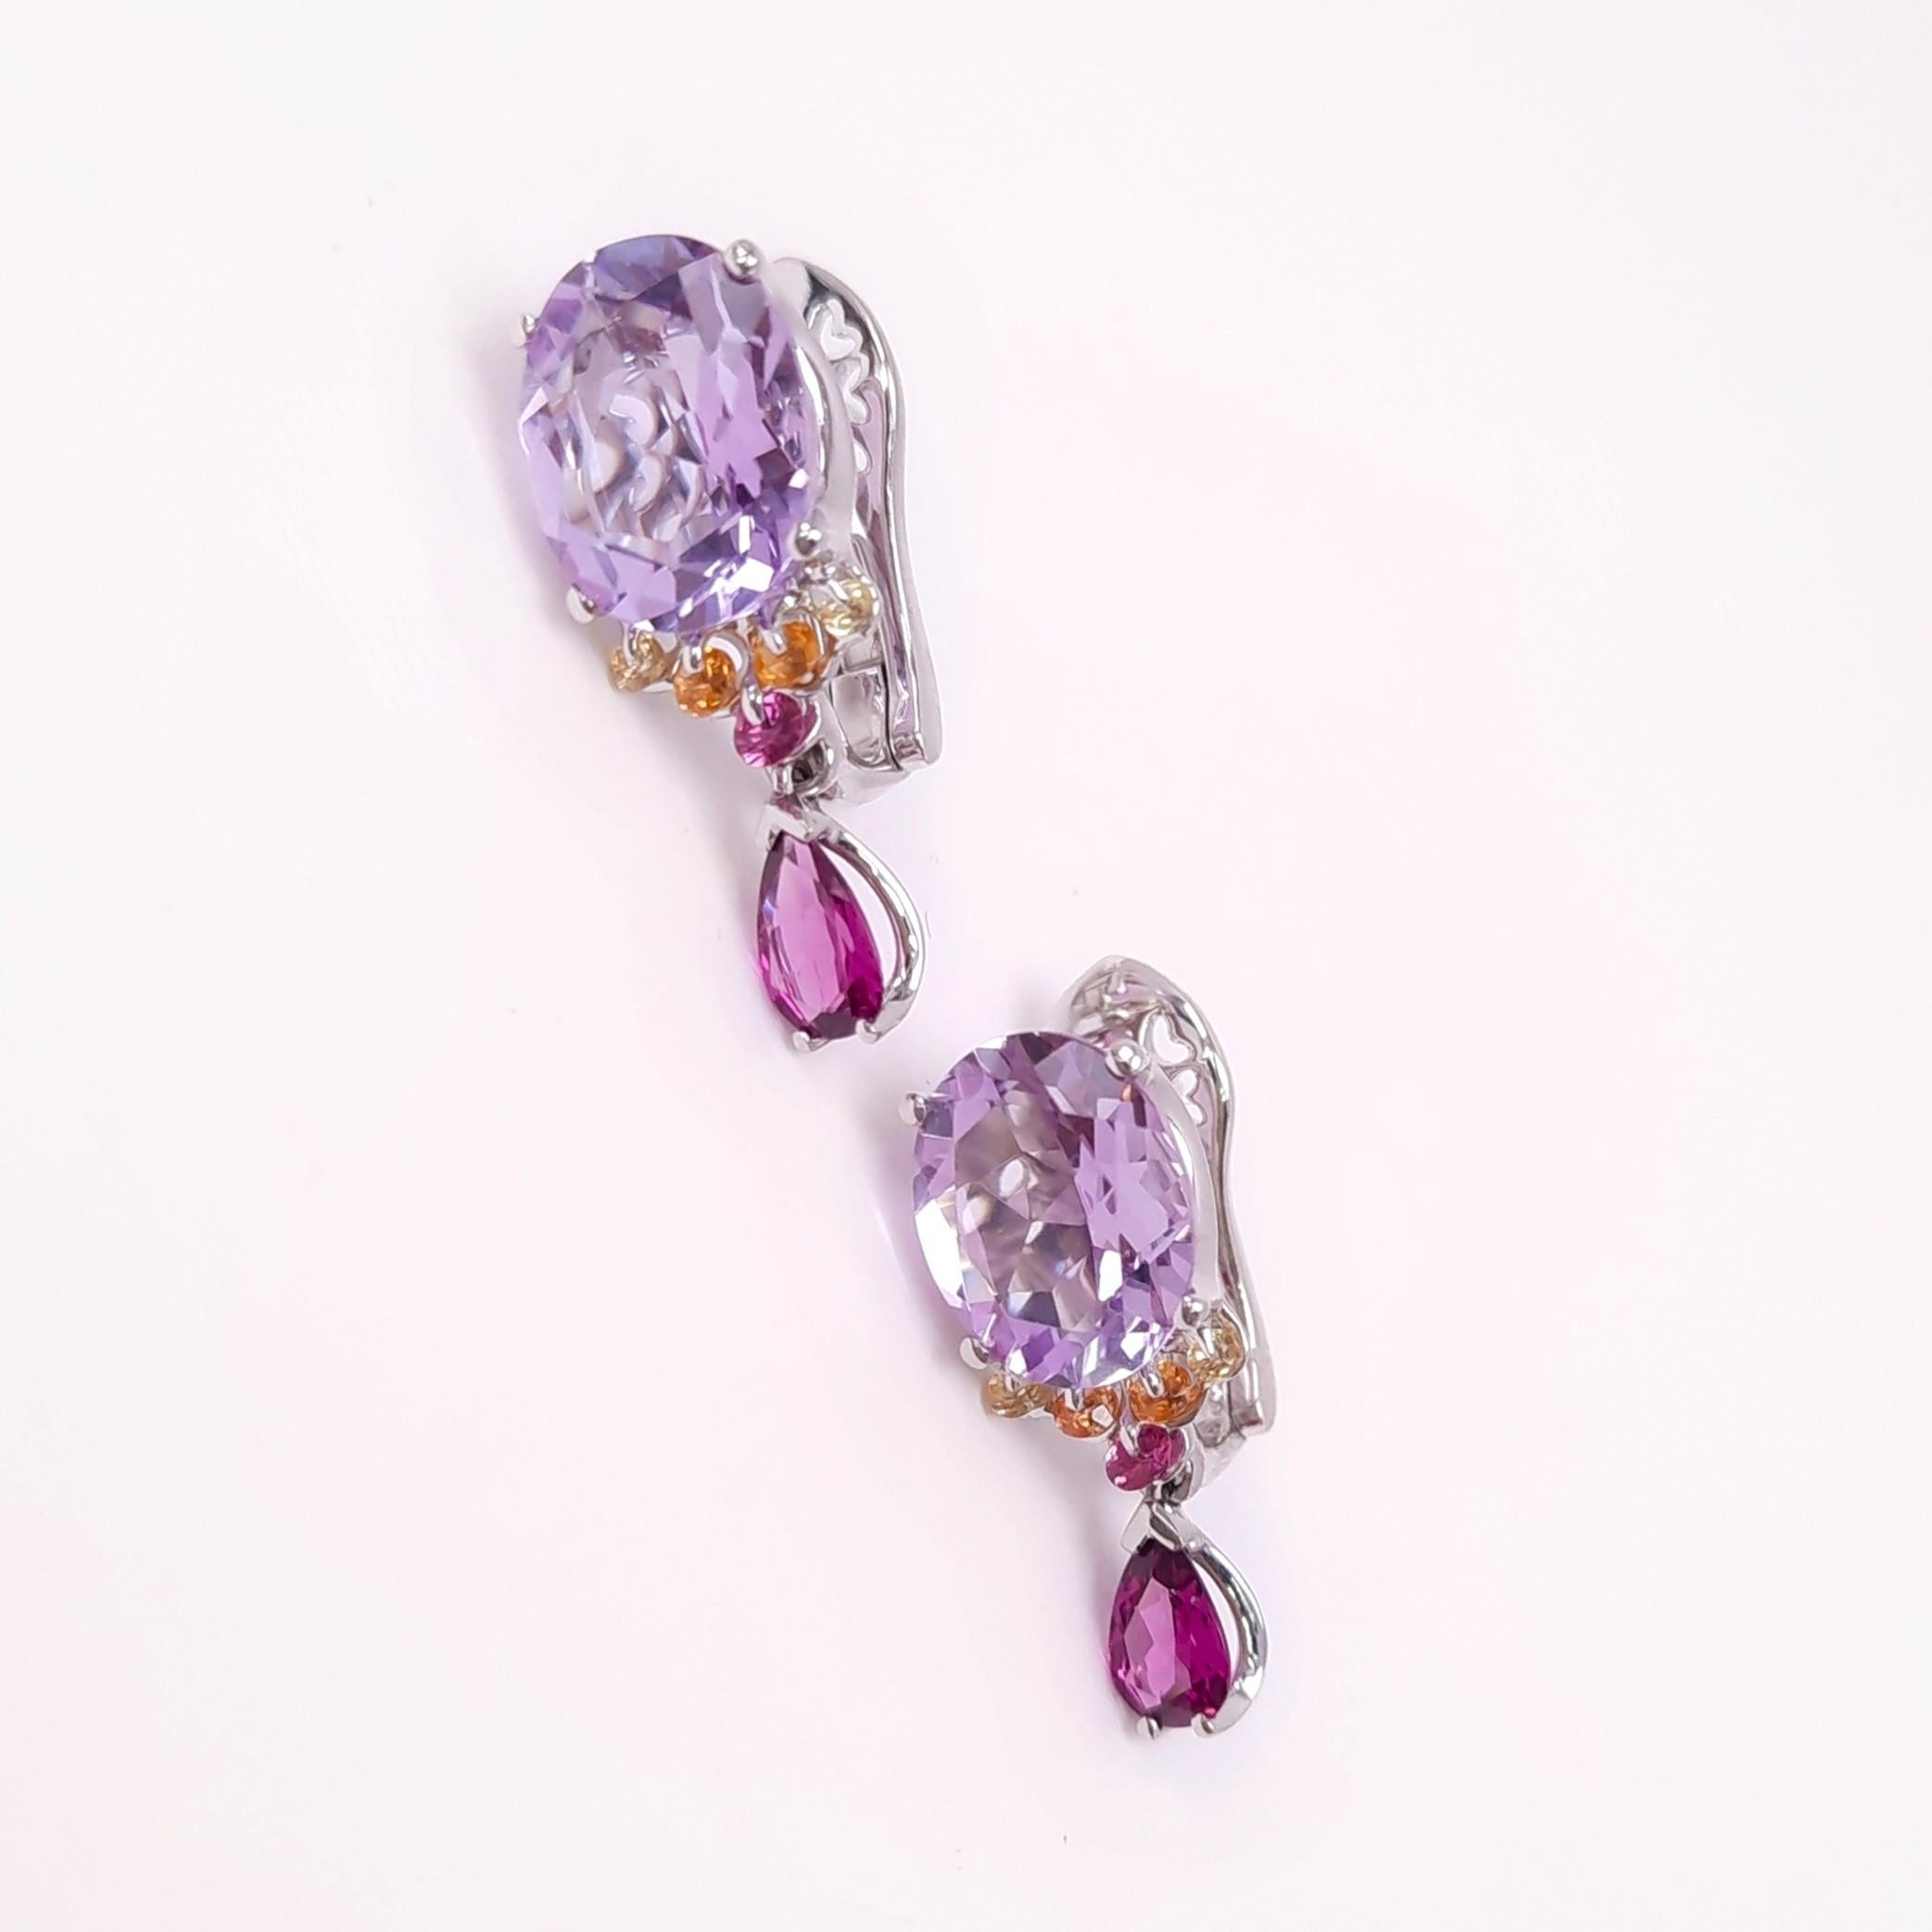 Crafted to perfection, MOISEIKIN's colourful earrings  from the Tsvetodelika collection are made with mysterious and graceful amethyst, diamond-cut golden sapphires, and feminine rhodolite garnets. Using the patented technology that would bring more